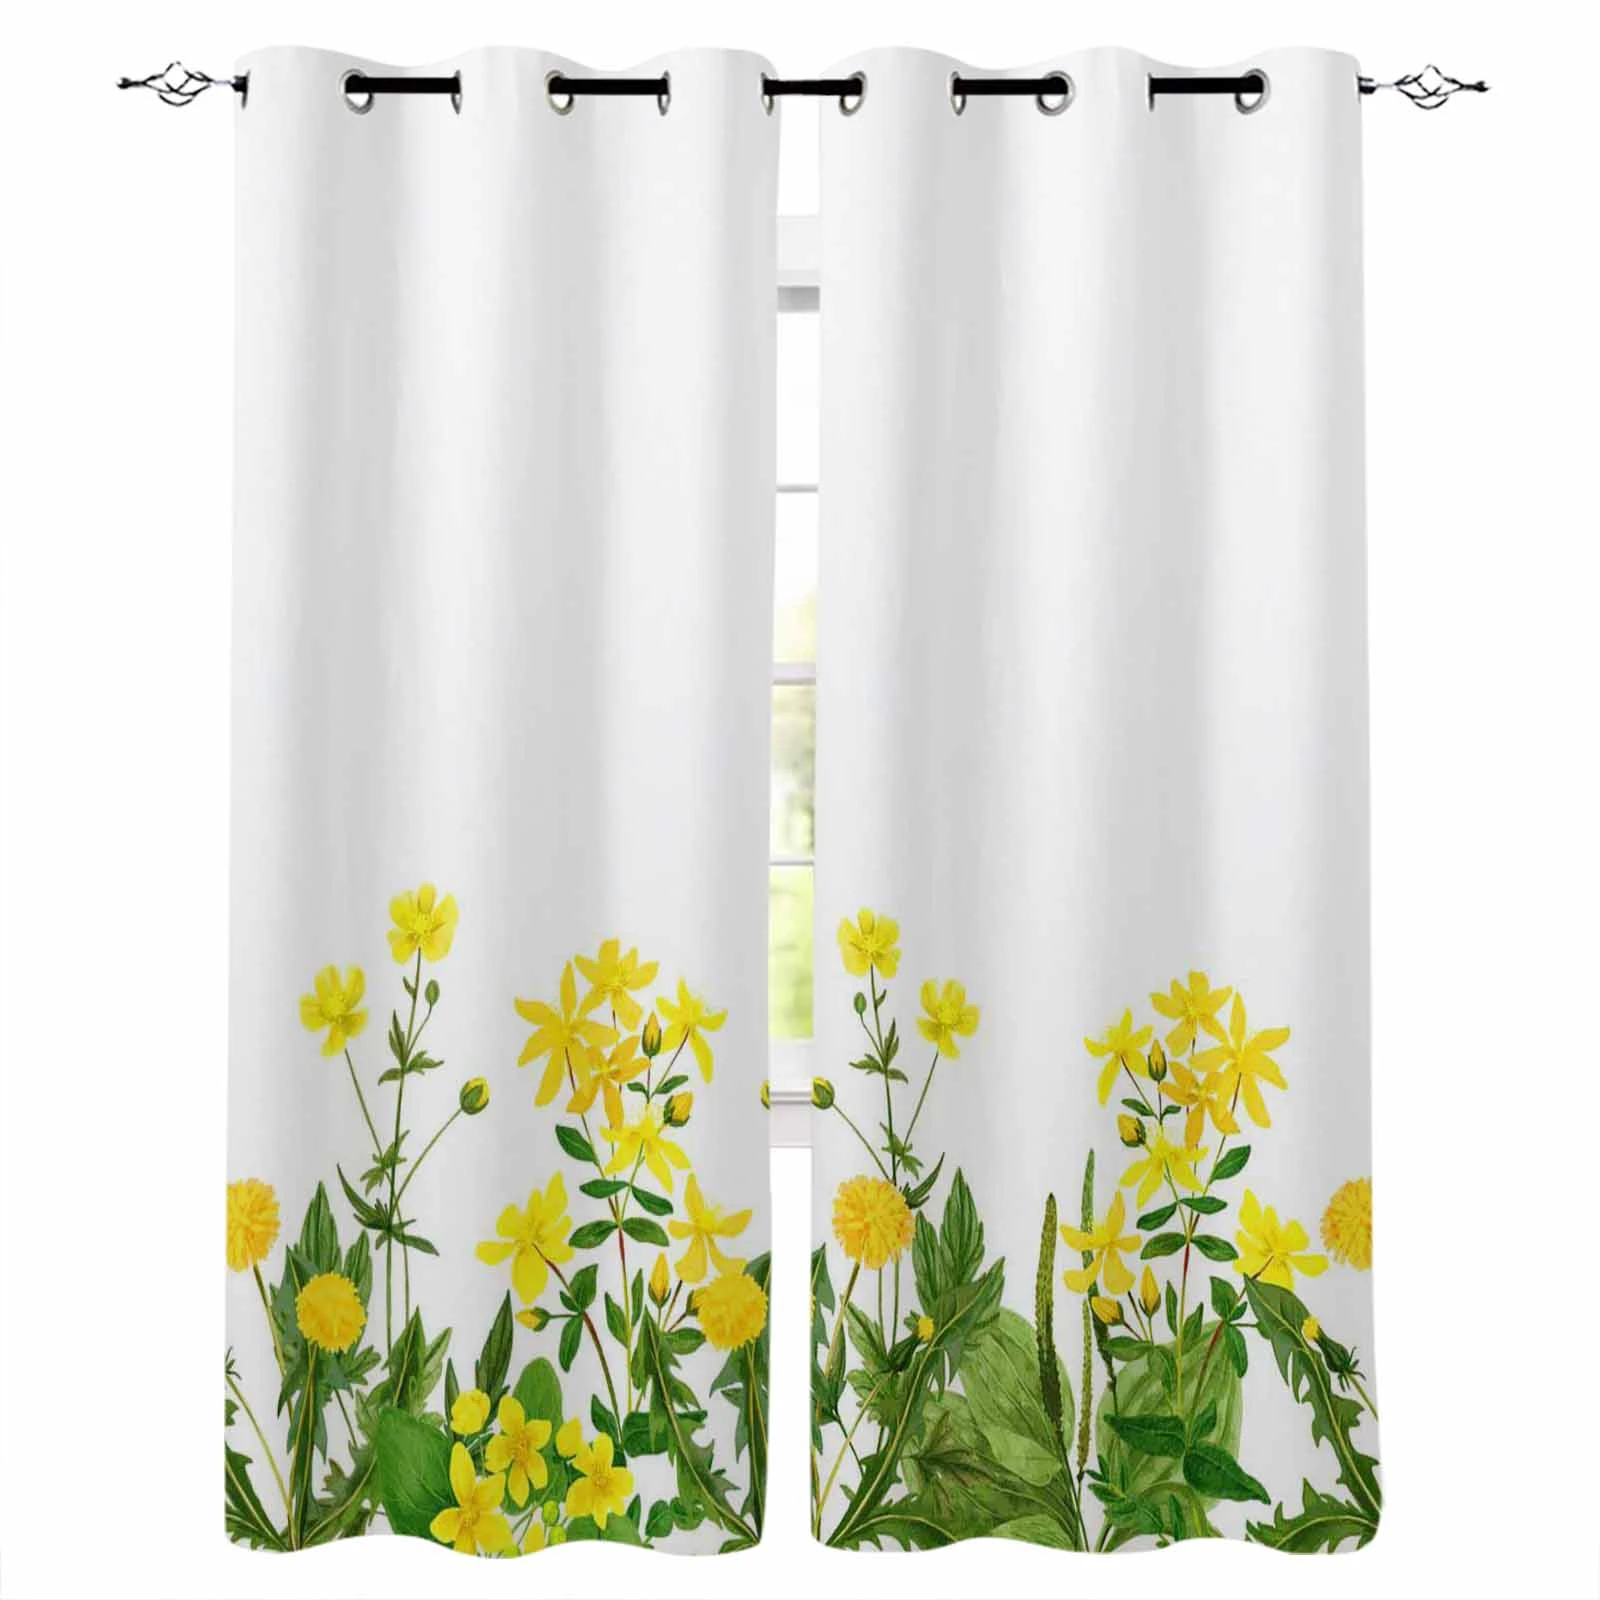 Spring Plants Watercolor Field Flowers Herbs Curtains For Bedroom Living Room Curtains Curtains For Living Room Luxury Kitchen yellow curtains